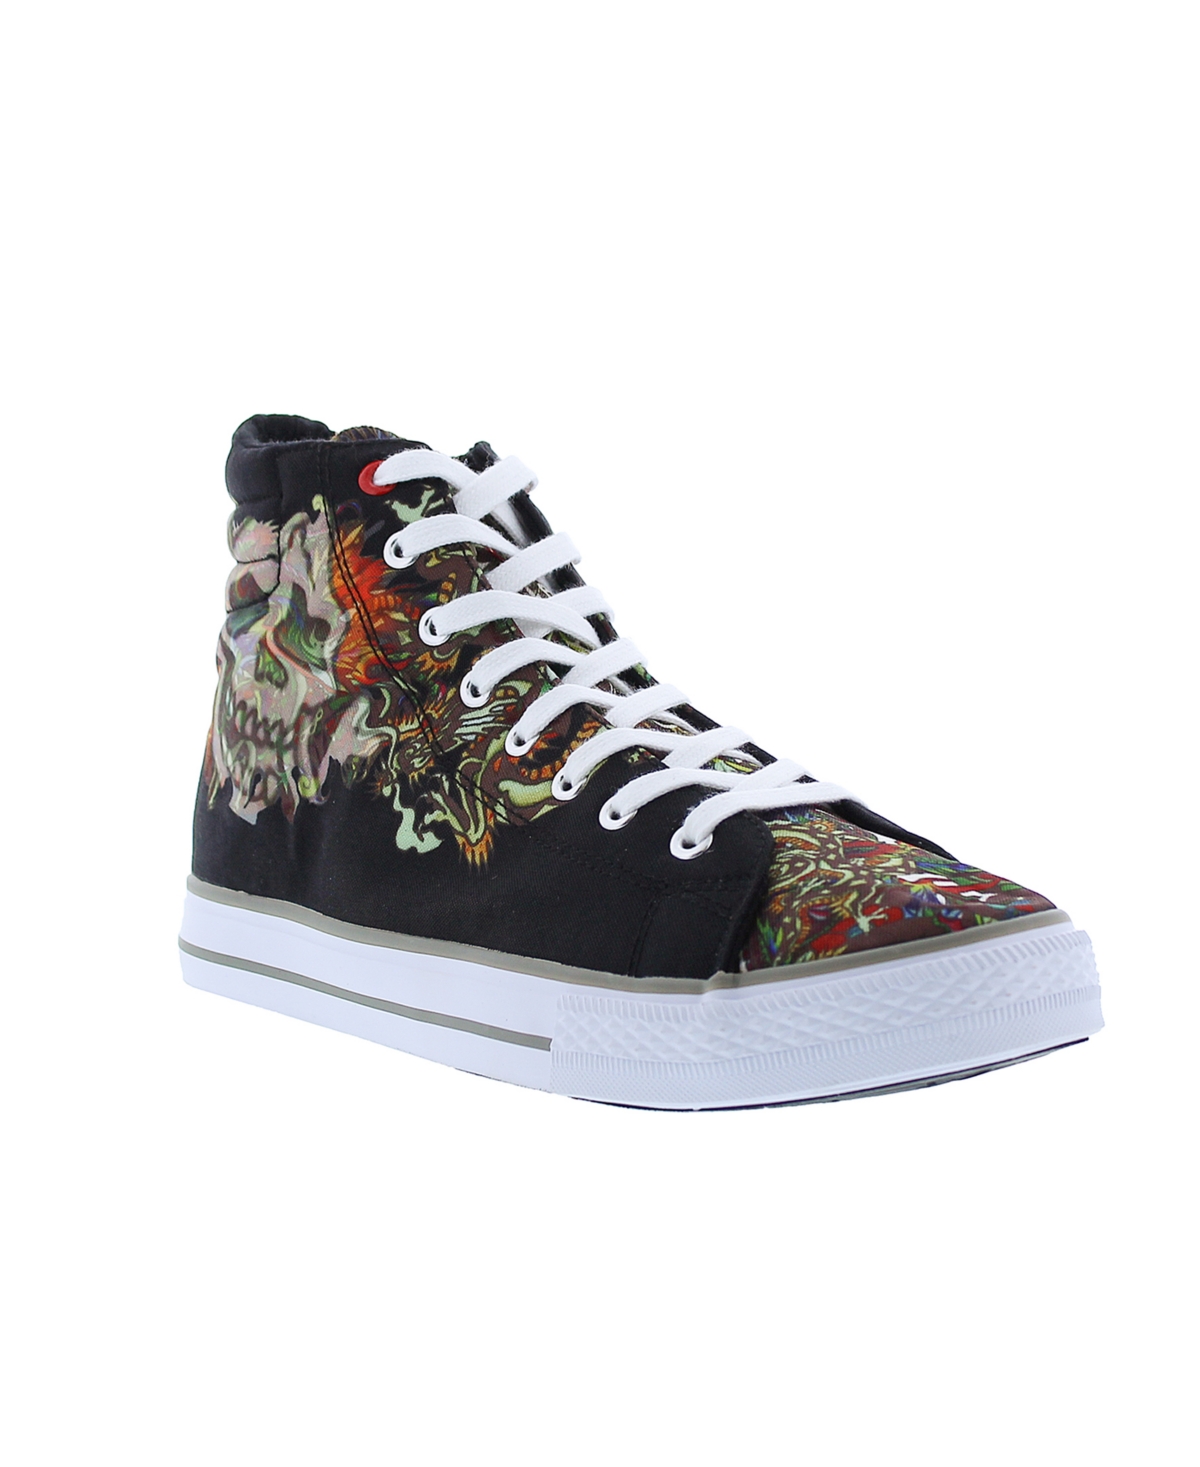 Ed Hardy Men's Still Life High Top Sneakers Men's Shoes